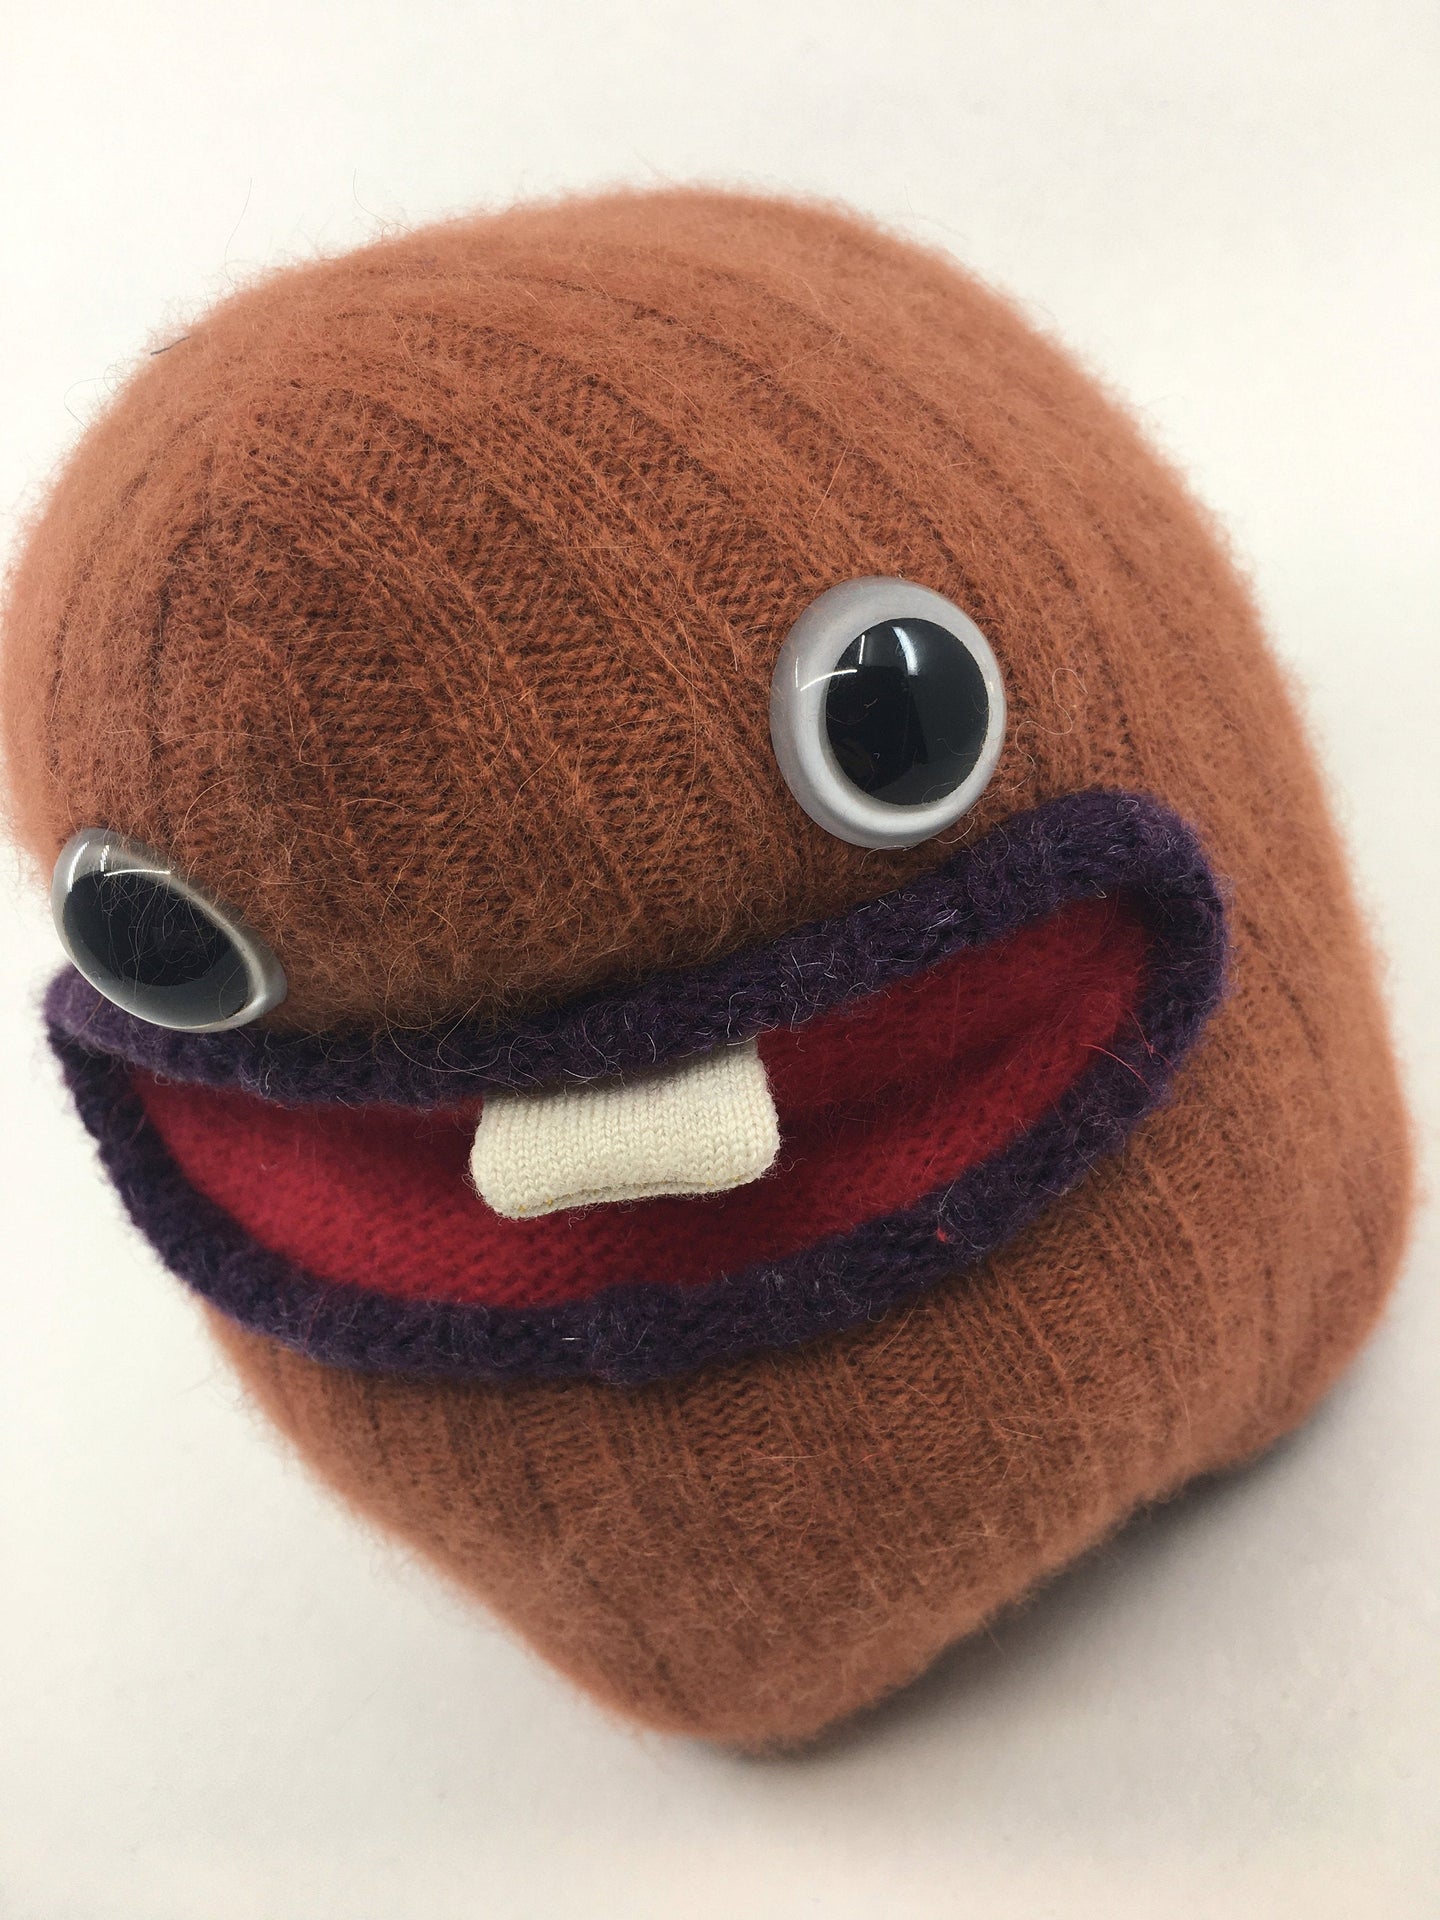 Victor the my friend monster™ plush